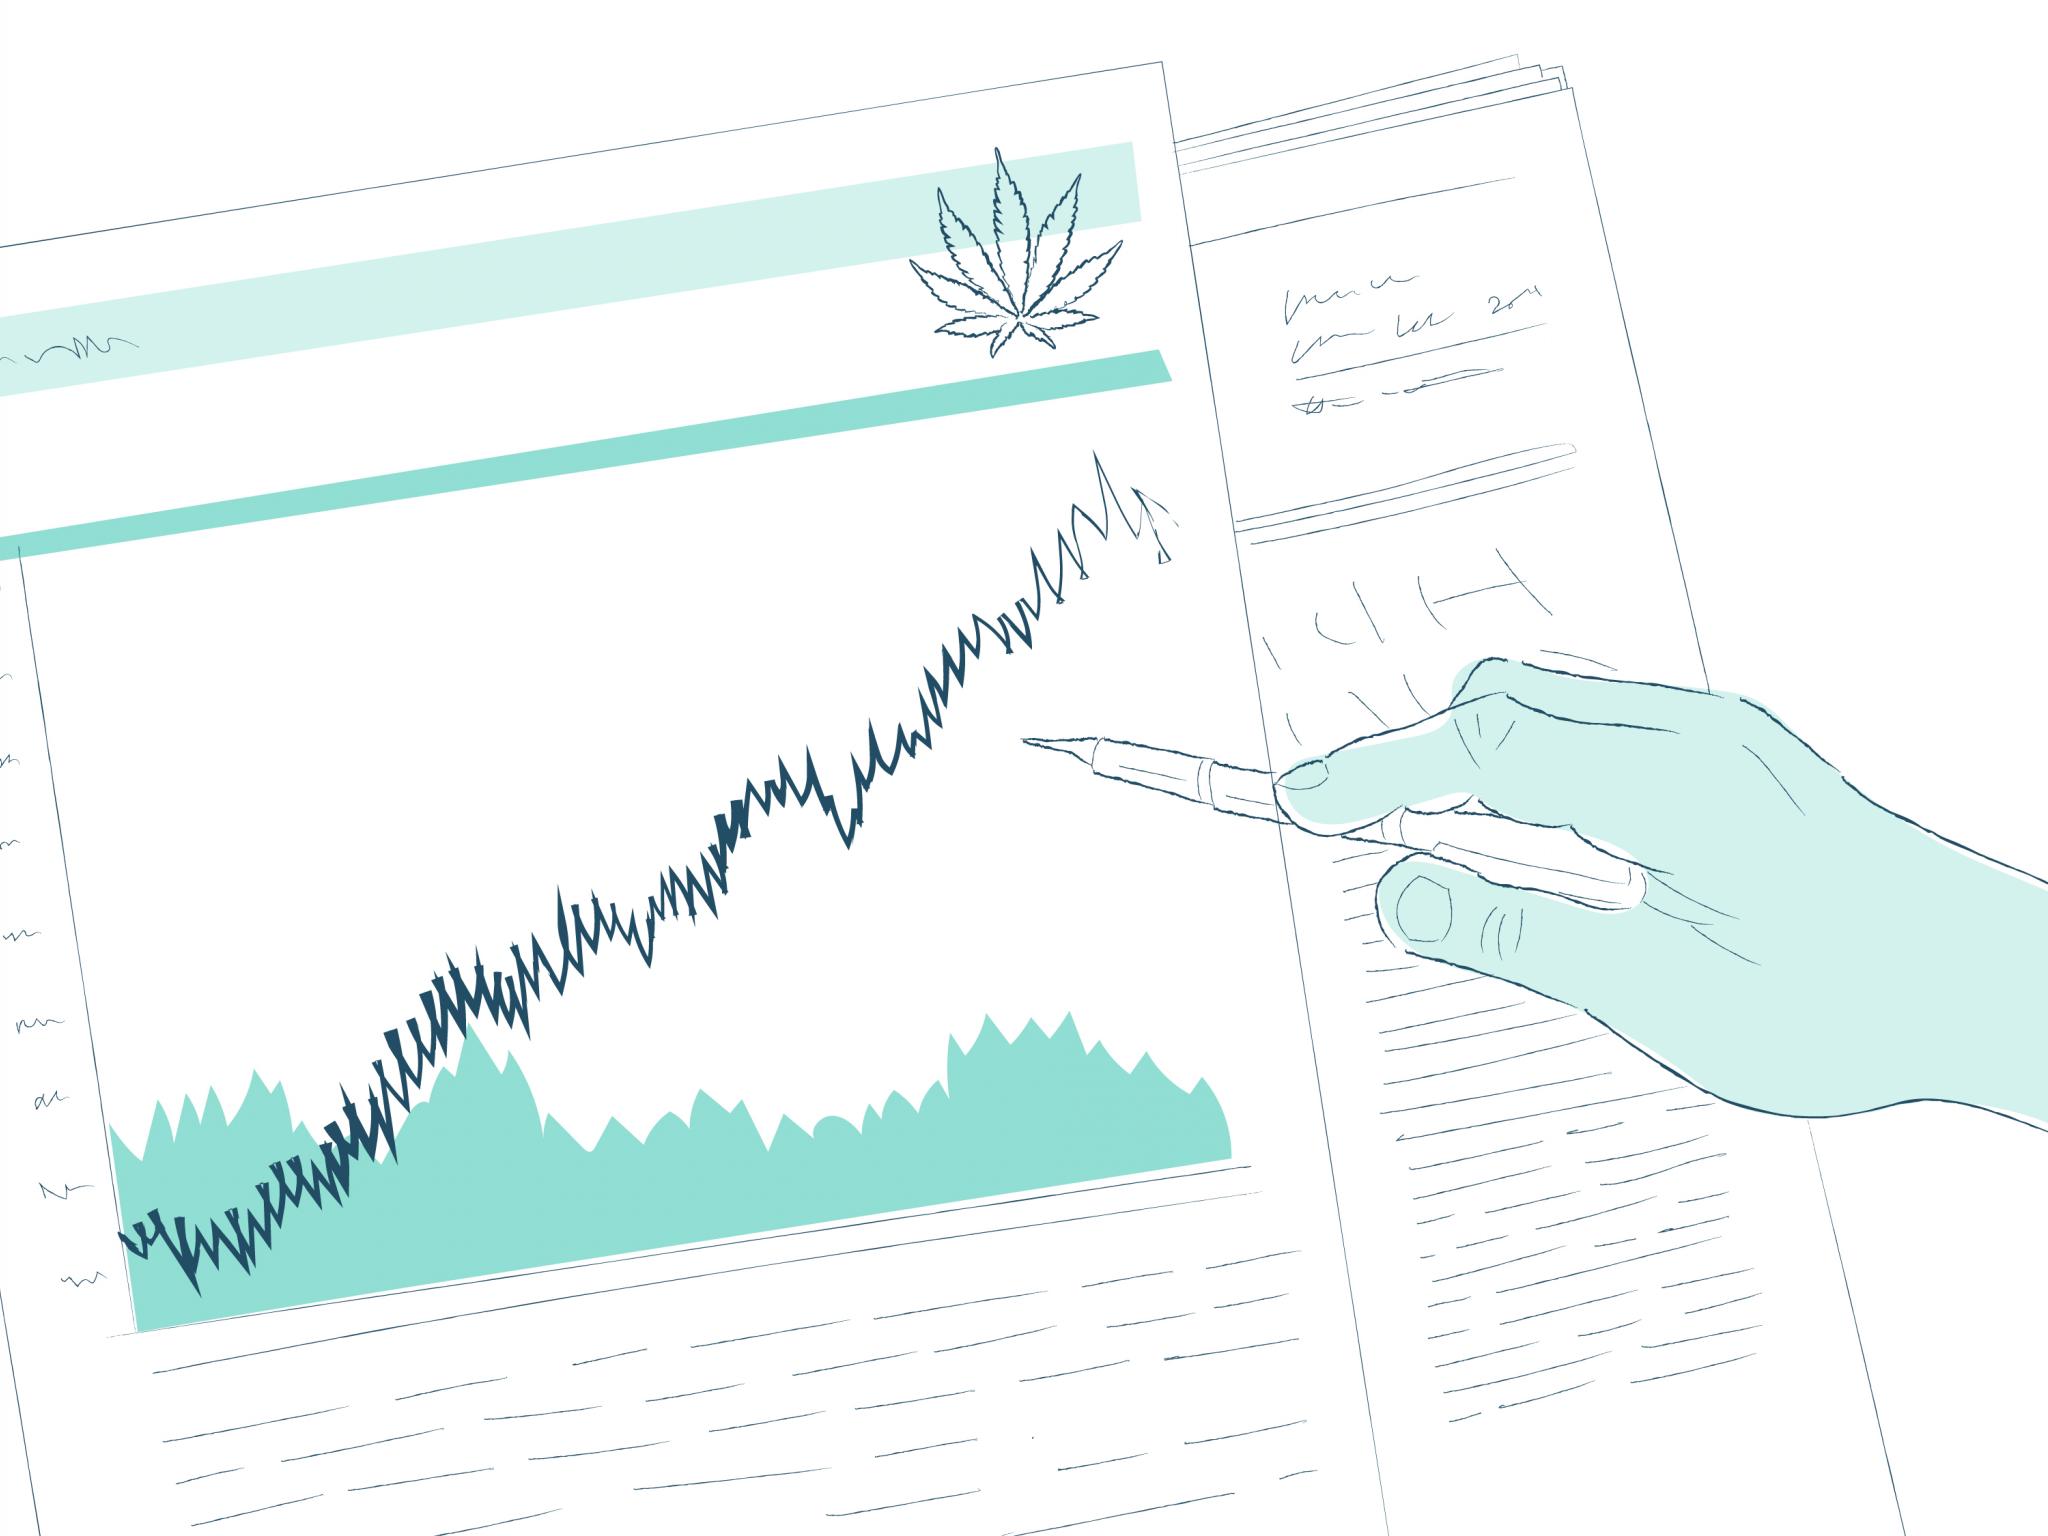  cannabis-stock-gainers-and-losers-from-december-22-2020 